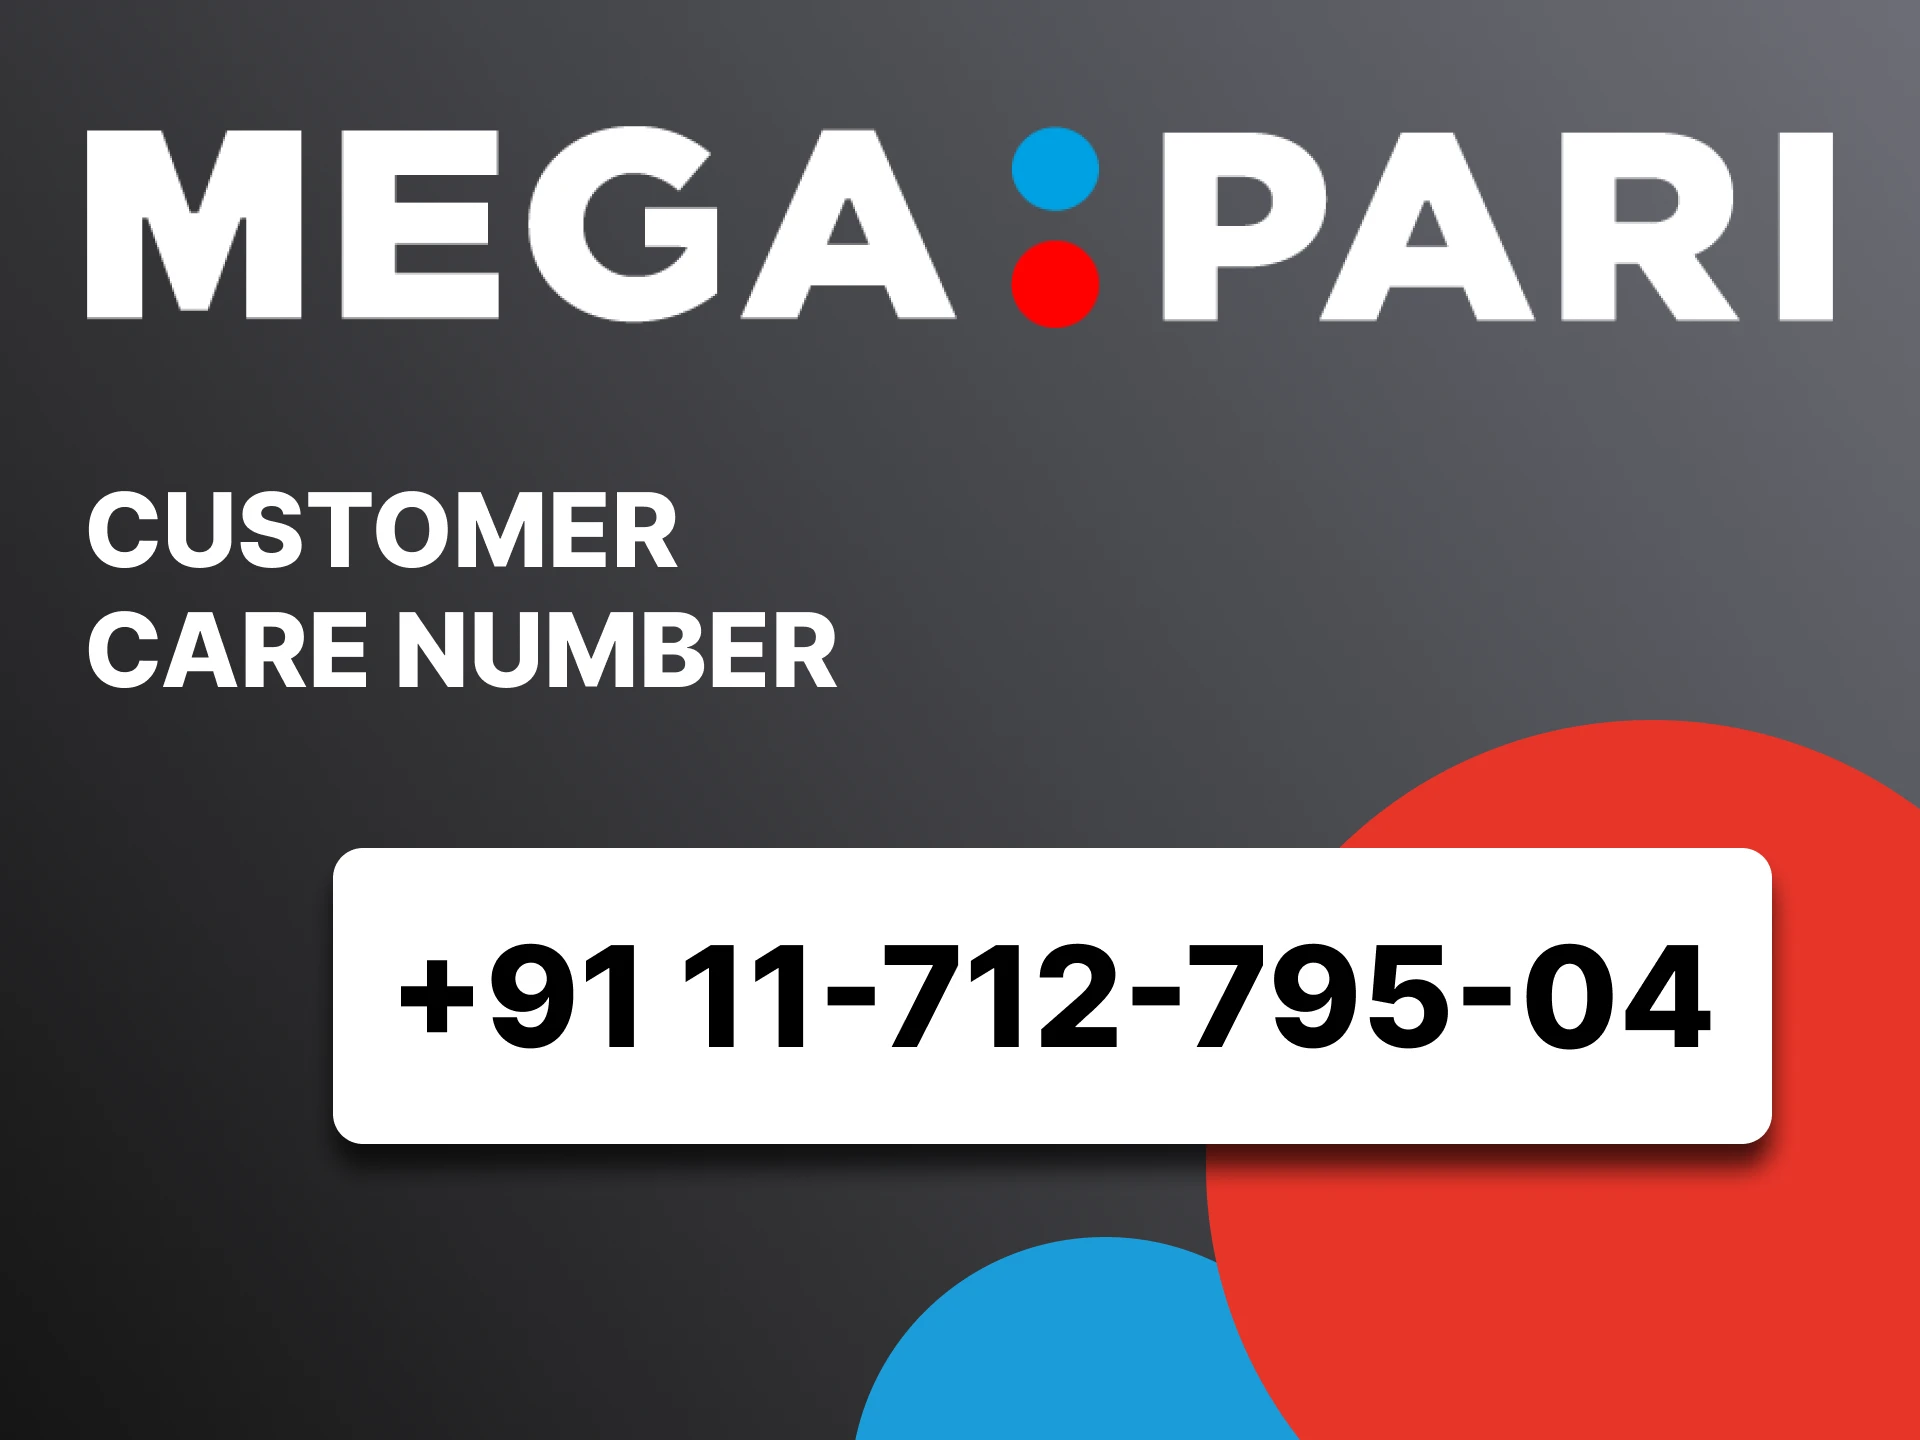 How can I contact technical support of the Megapari online casino website by phone.